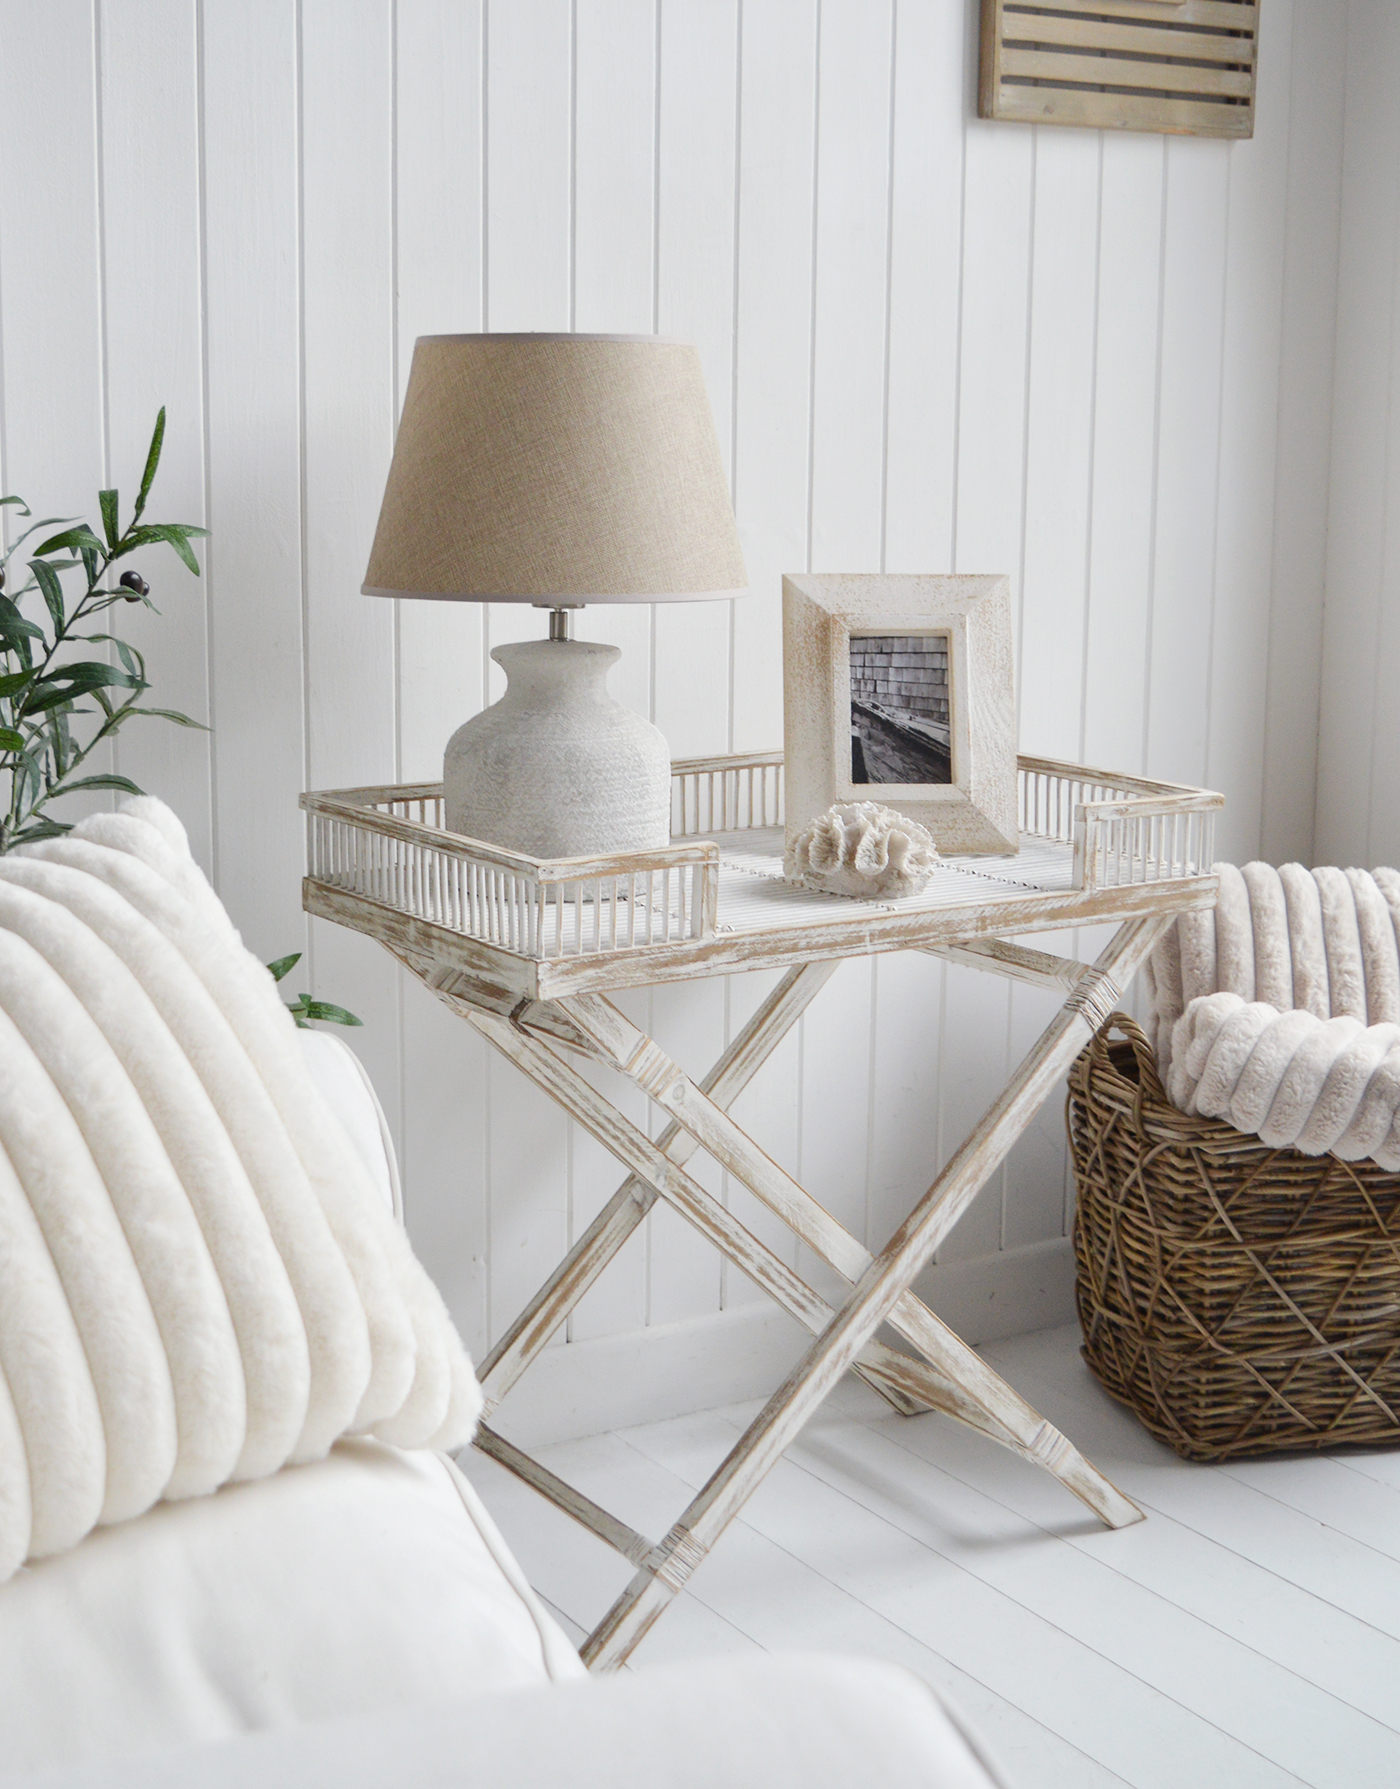 The Provincetown Table, a White wash beach house tray table, and ideal piece of furniture for coastal homes and interiors - shown beside a naturally grey coloured Casco Bay basket